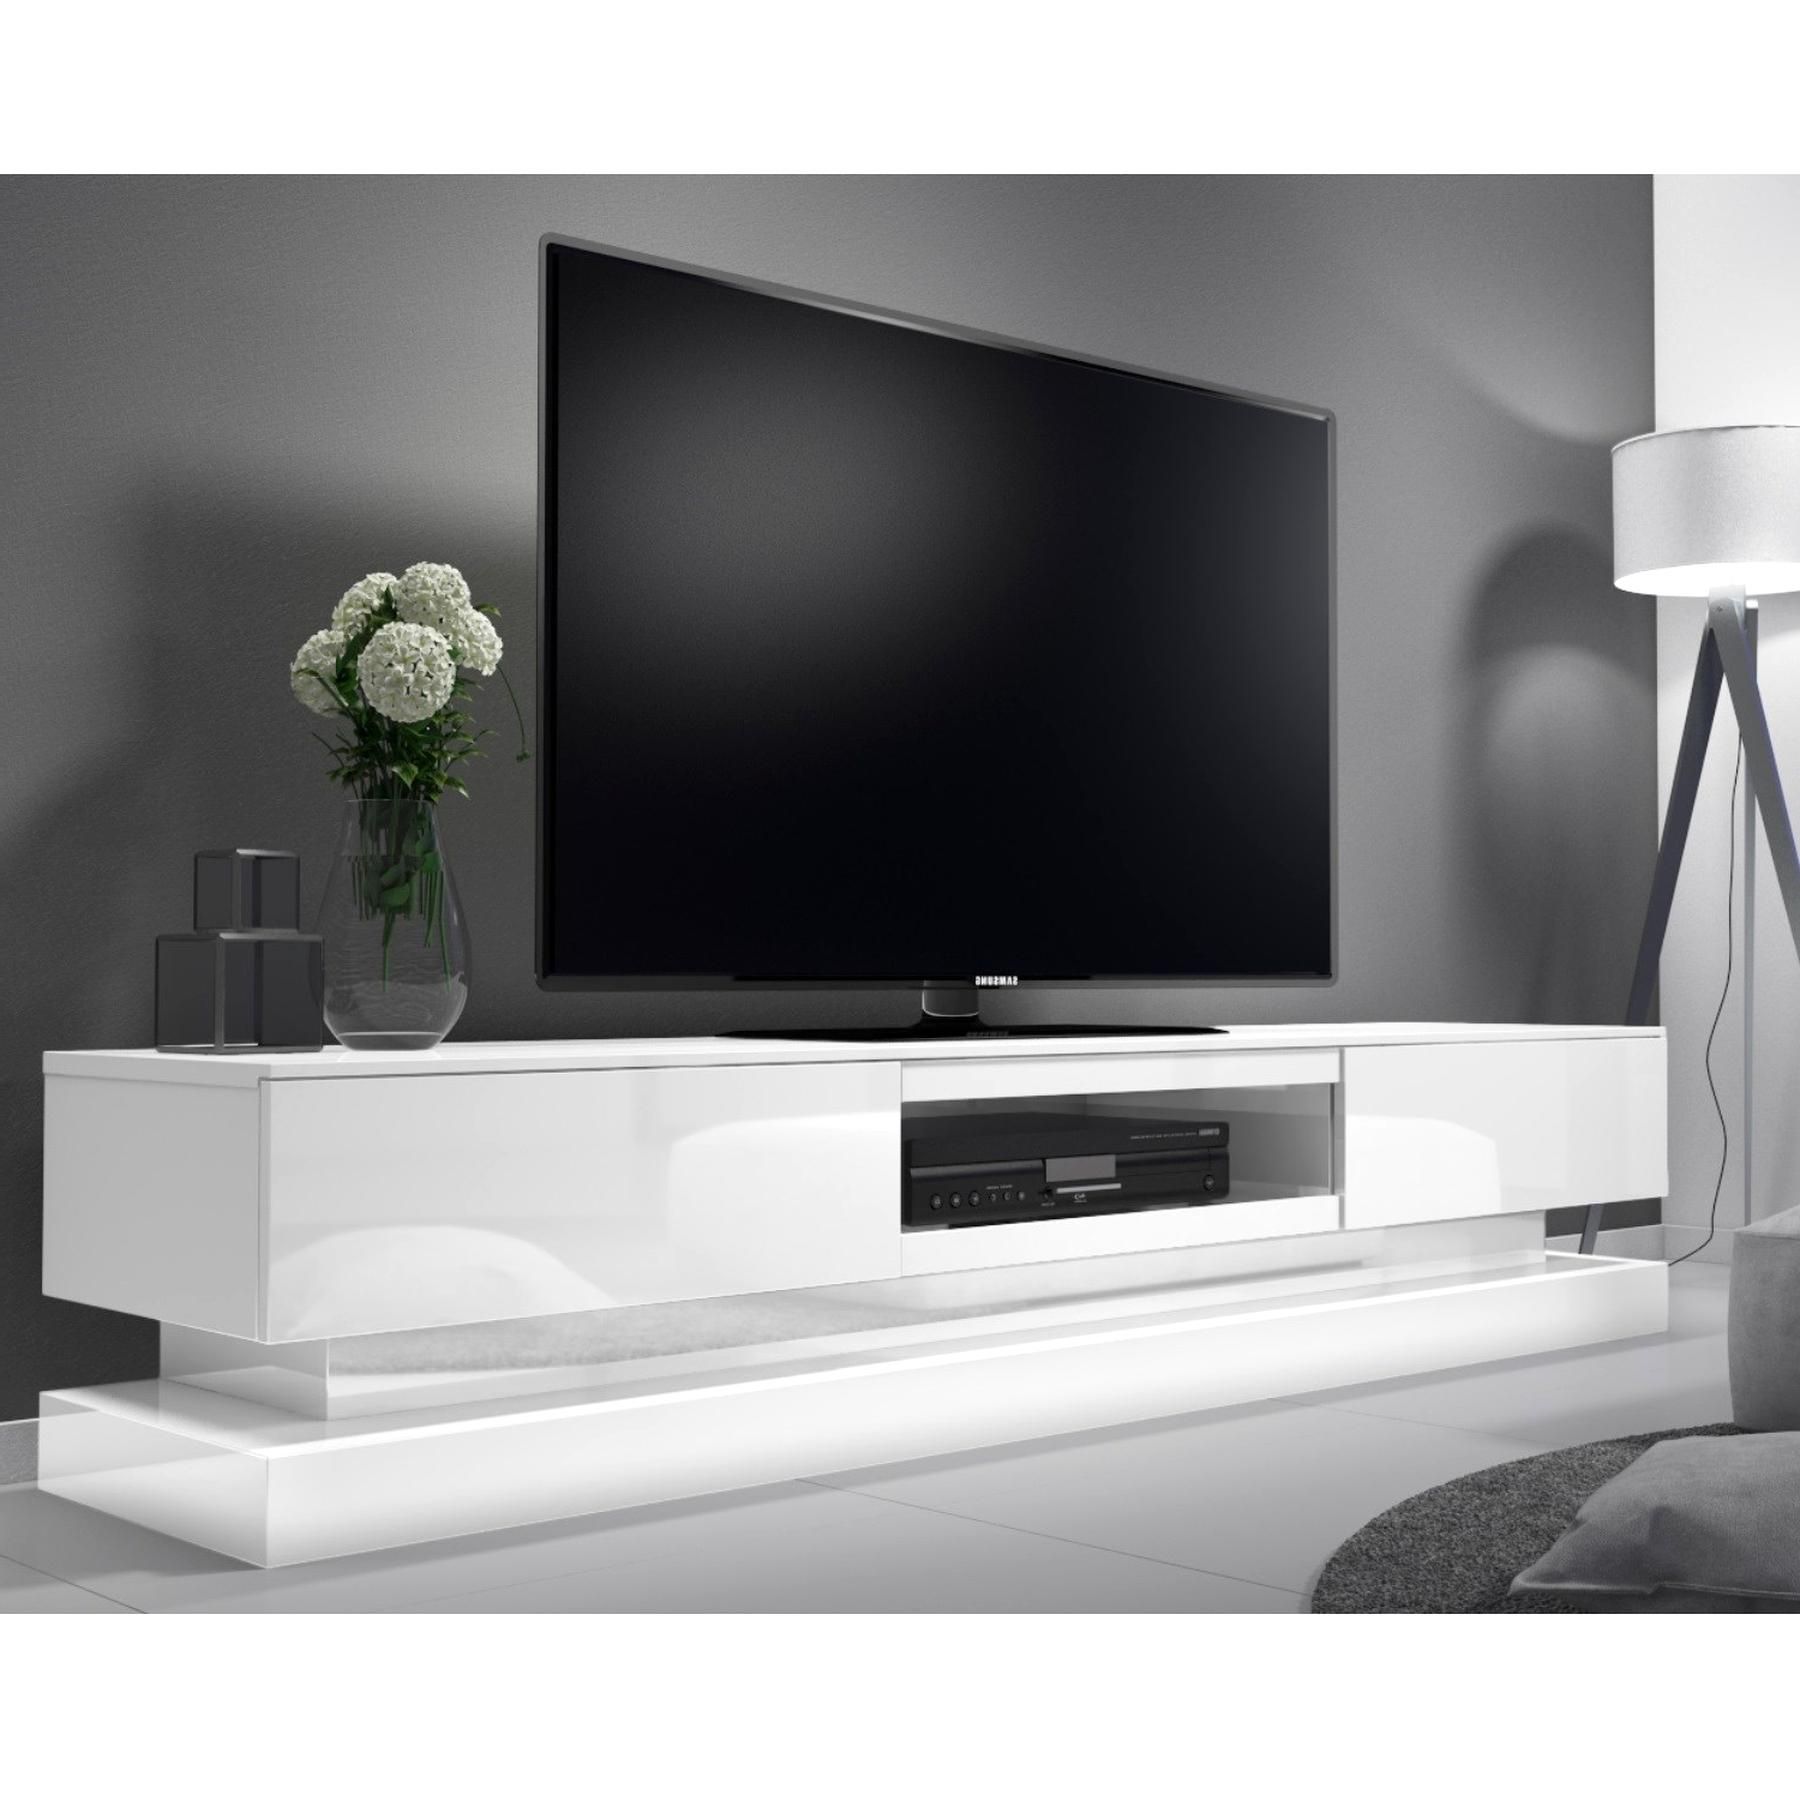 Gloss Tv Stand For Sale In Uk | 112 Used Gloss Tv Stands For Long White Tv Stands (View 6 of 15)